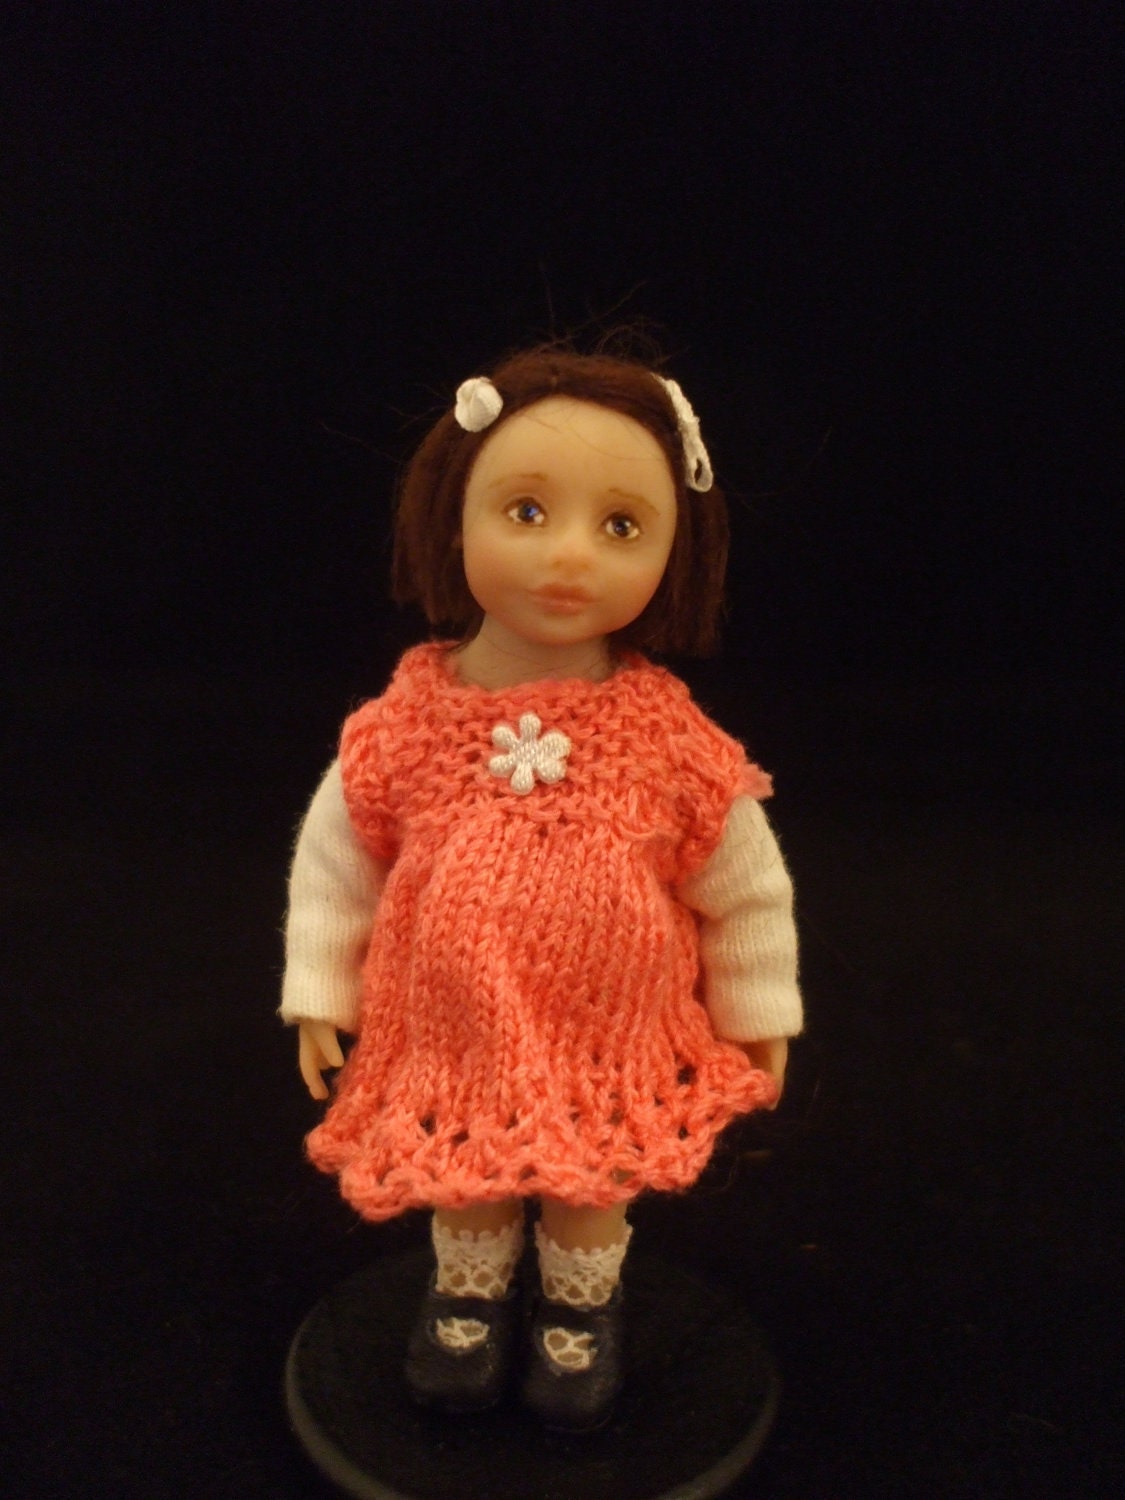 CDHM Artisan Julie Campbell, IGMA Artisan of Bellabelle Dolls, OOAK hand sculpted 1:12 scale Child Doll